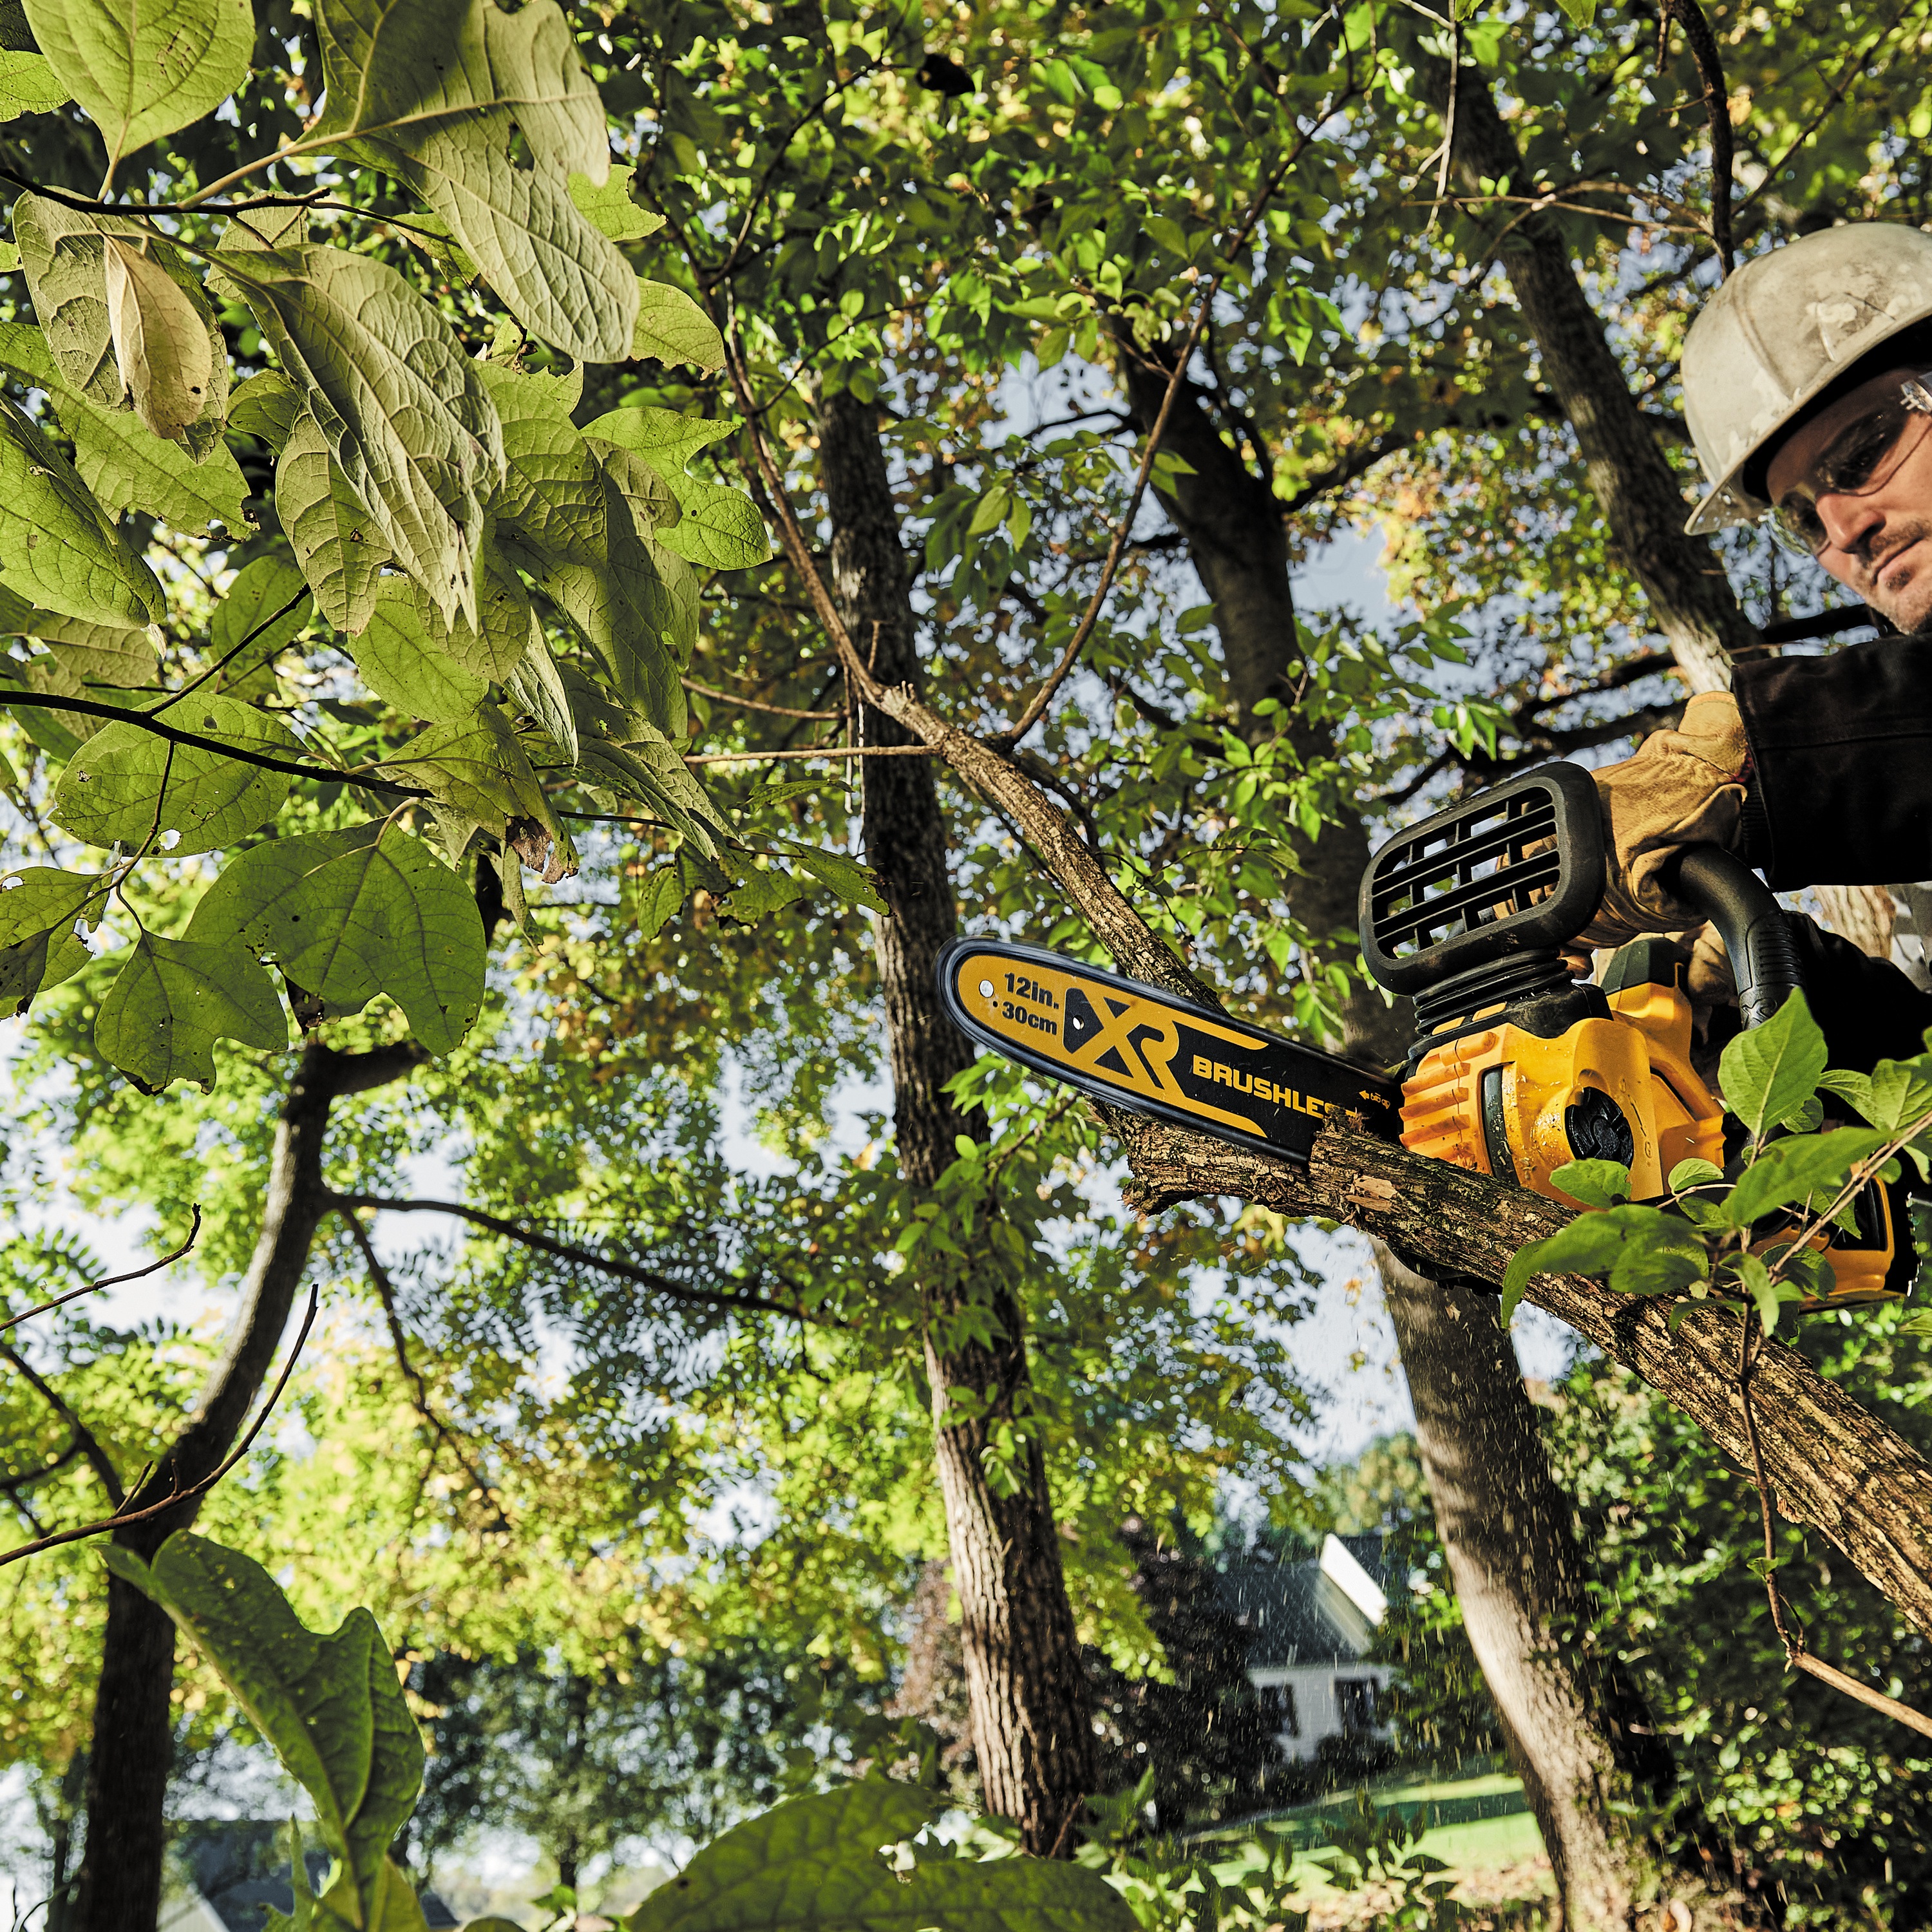 XR® Compact 12 inch Cordless Chainsaw being used by a worker to cut wood blocks out of a square log of wood at a construction site